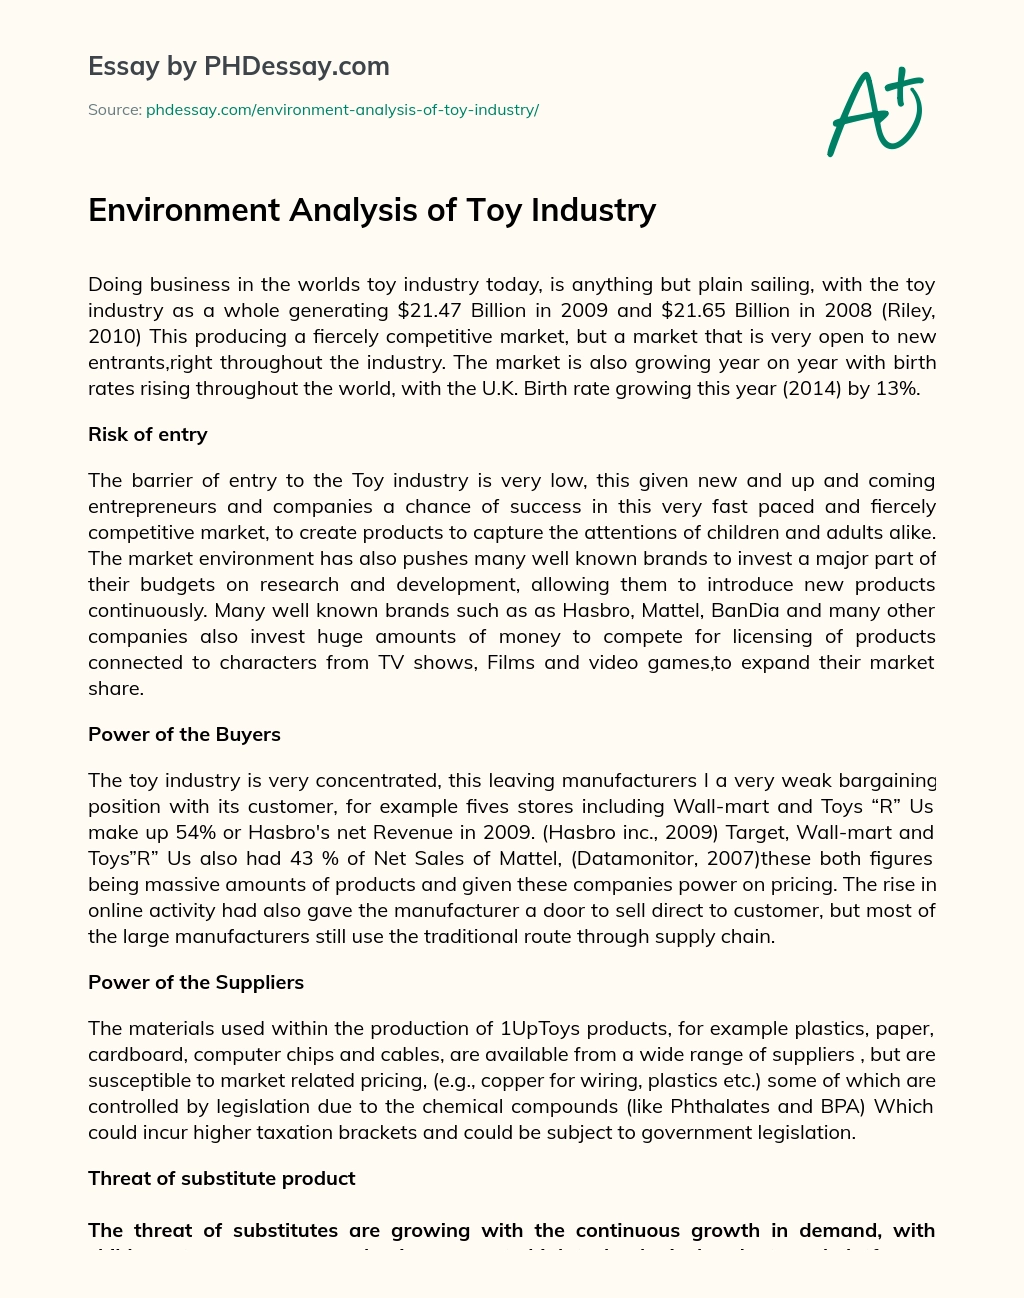 Environment Analysis of Toy Industry essay